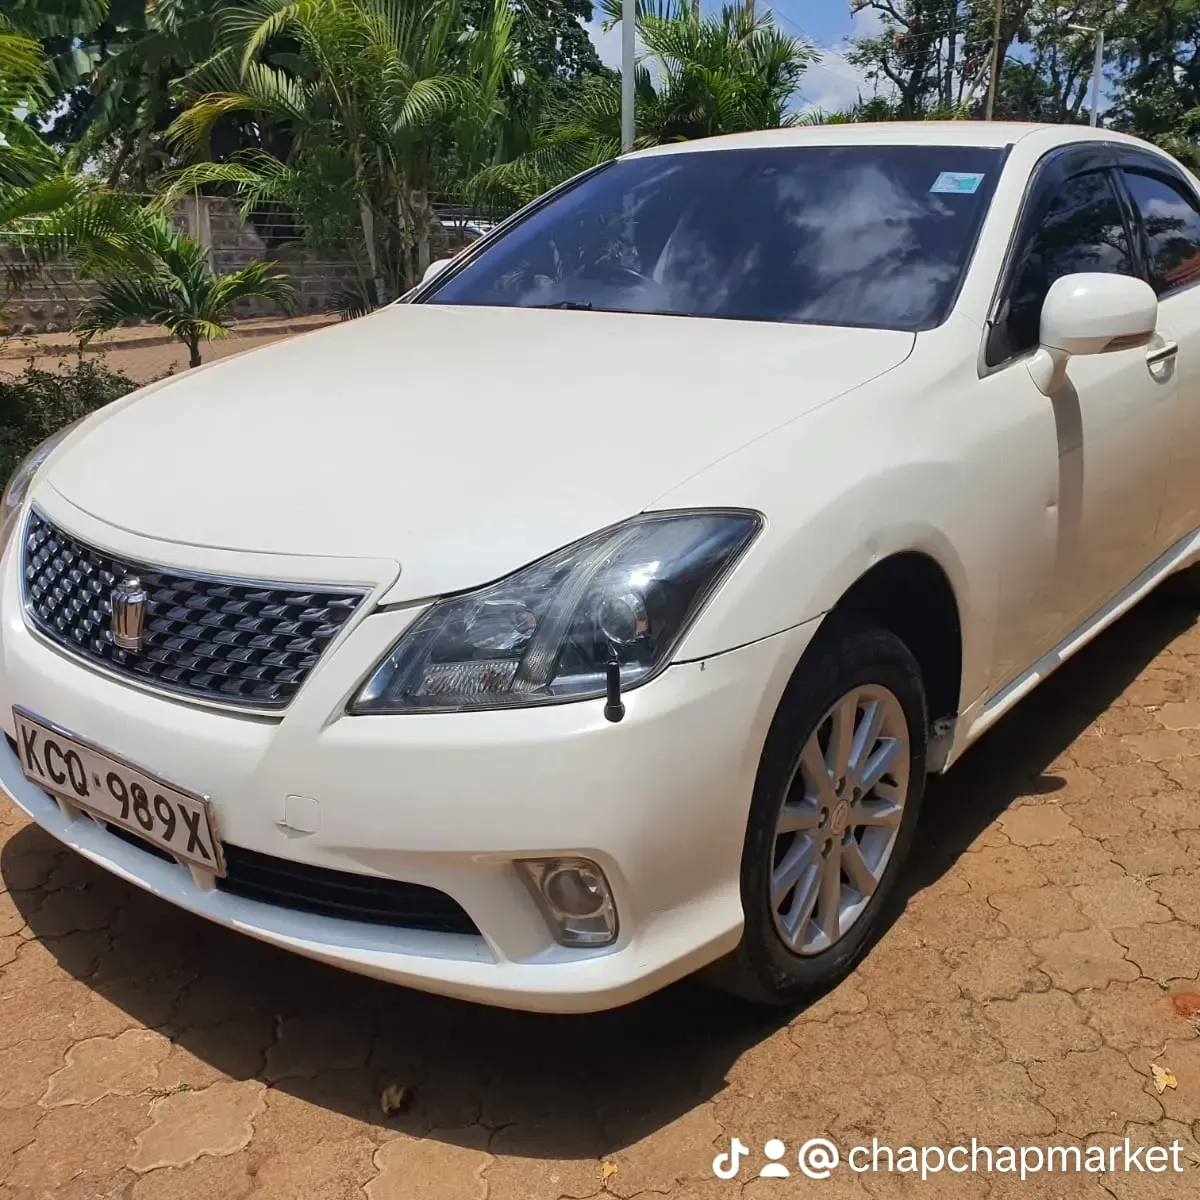 Toyota CROWN ATHLETE for Sale in kenya You pay Deposit Trade in Ok Hot Deal hire purchase installments